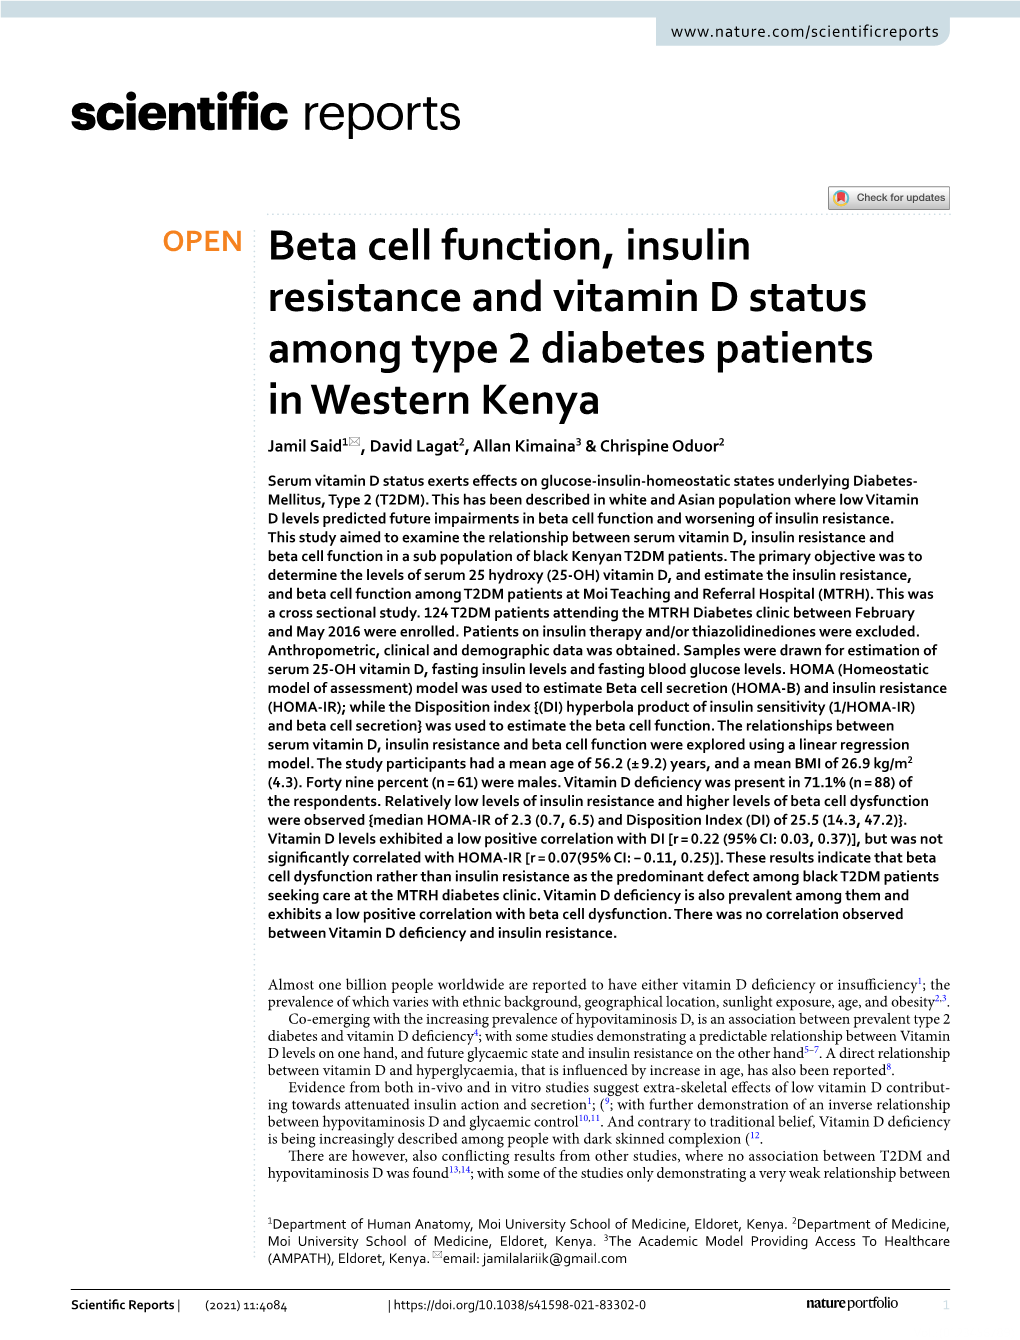 Beta Cell Function, Insulin Resistance and Vitamin D Status Among Type 2